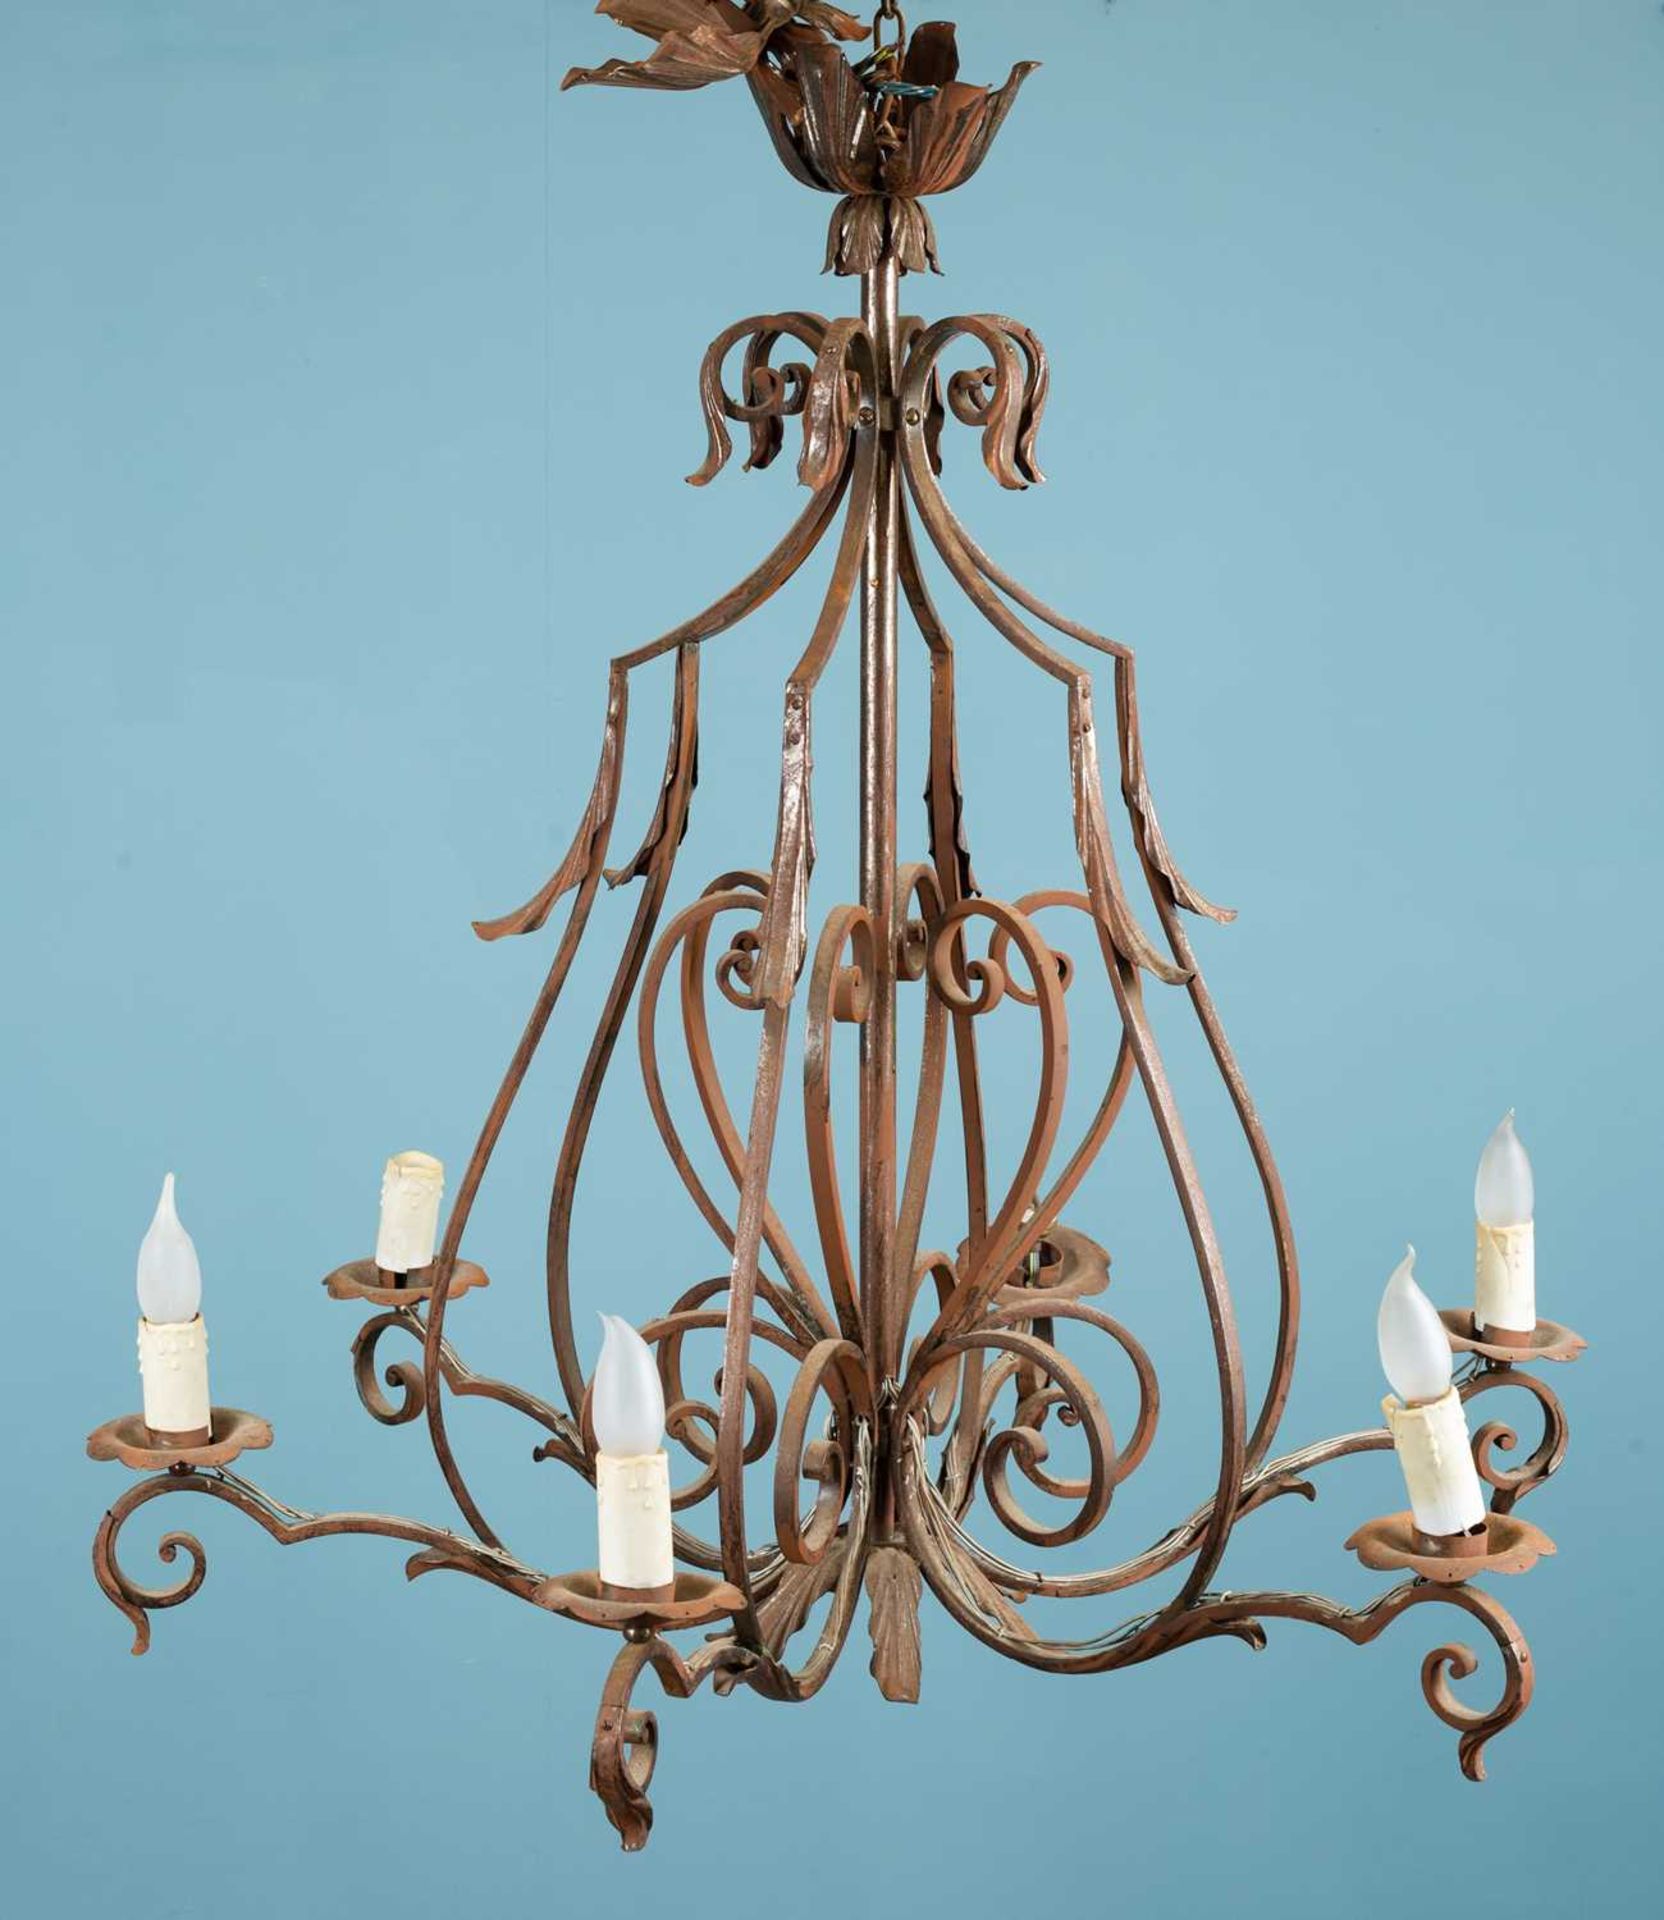 A 19th century antique wrought iron chandelier